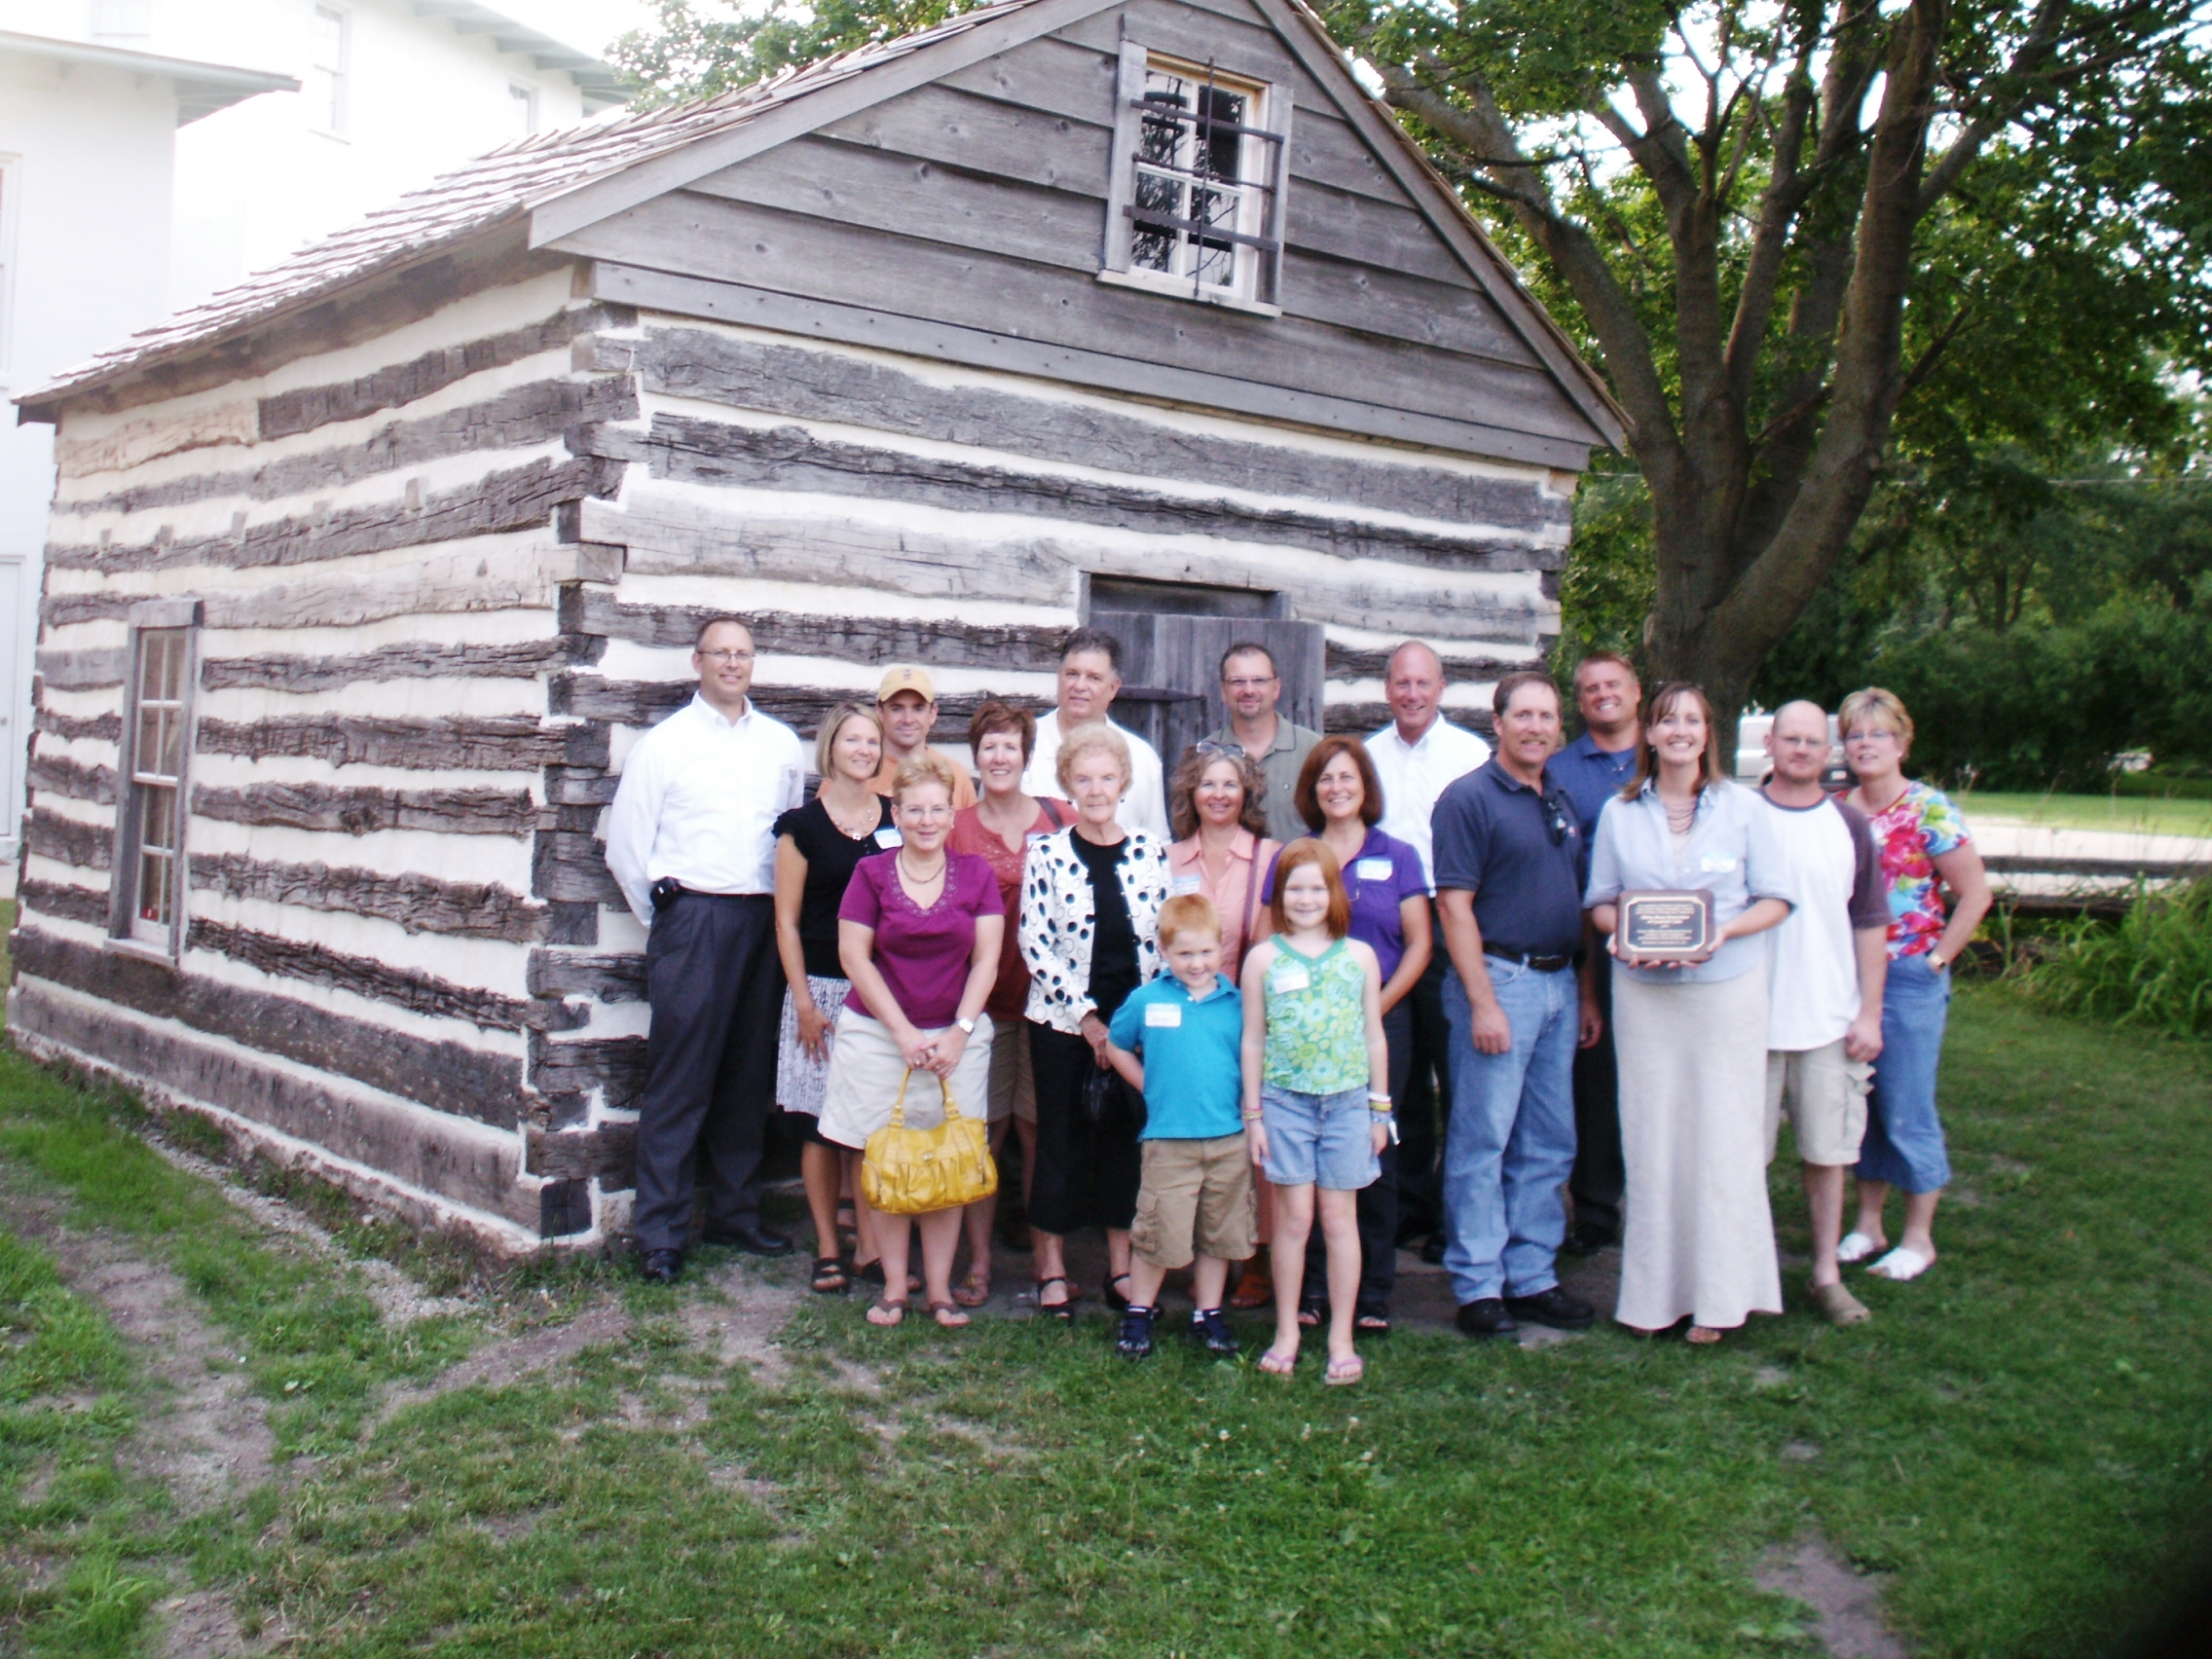 Members of the Milton Historical Society who worked to restore the historic Goodrich Cabin.